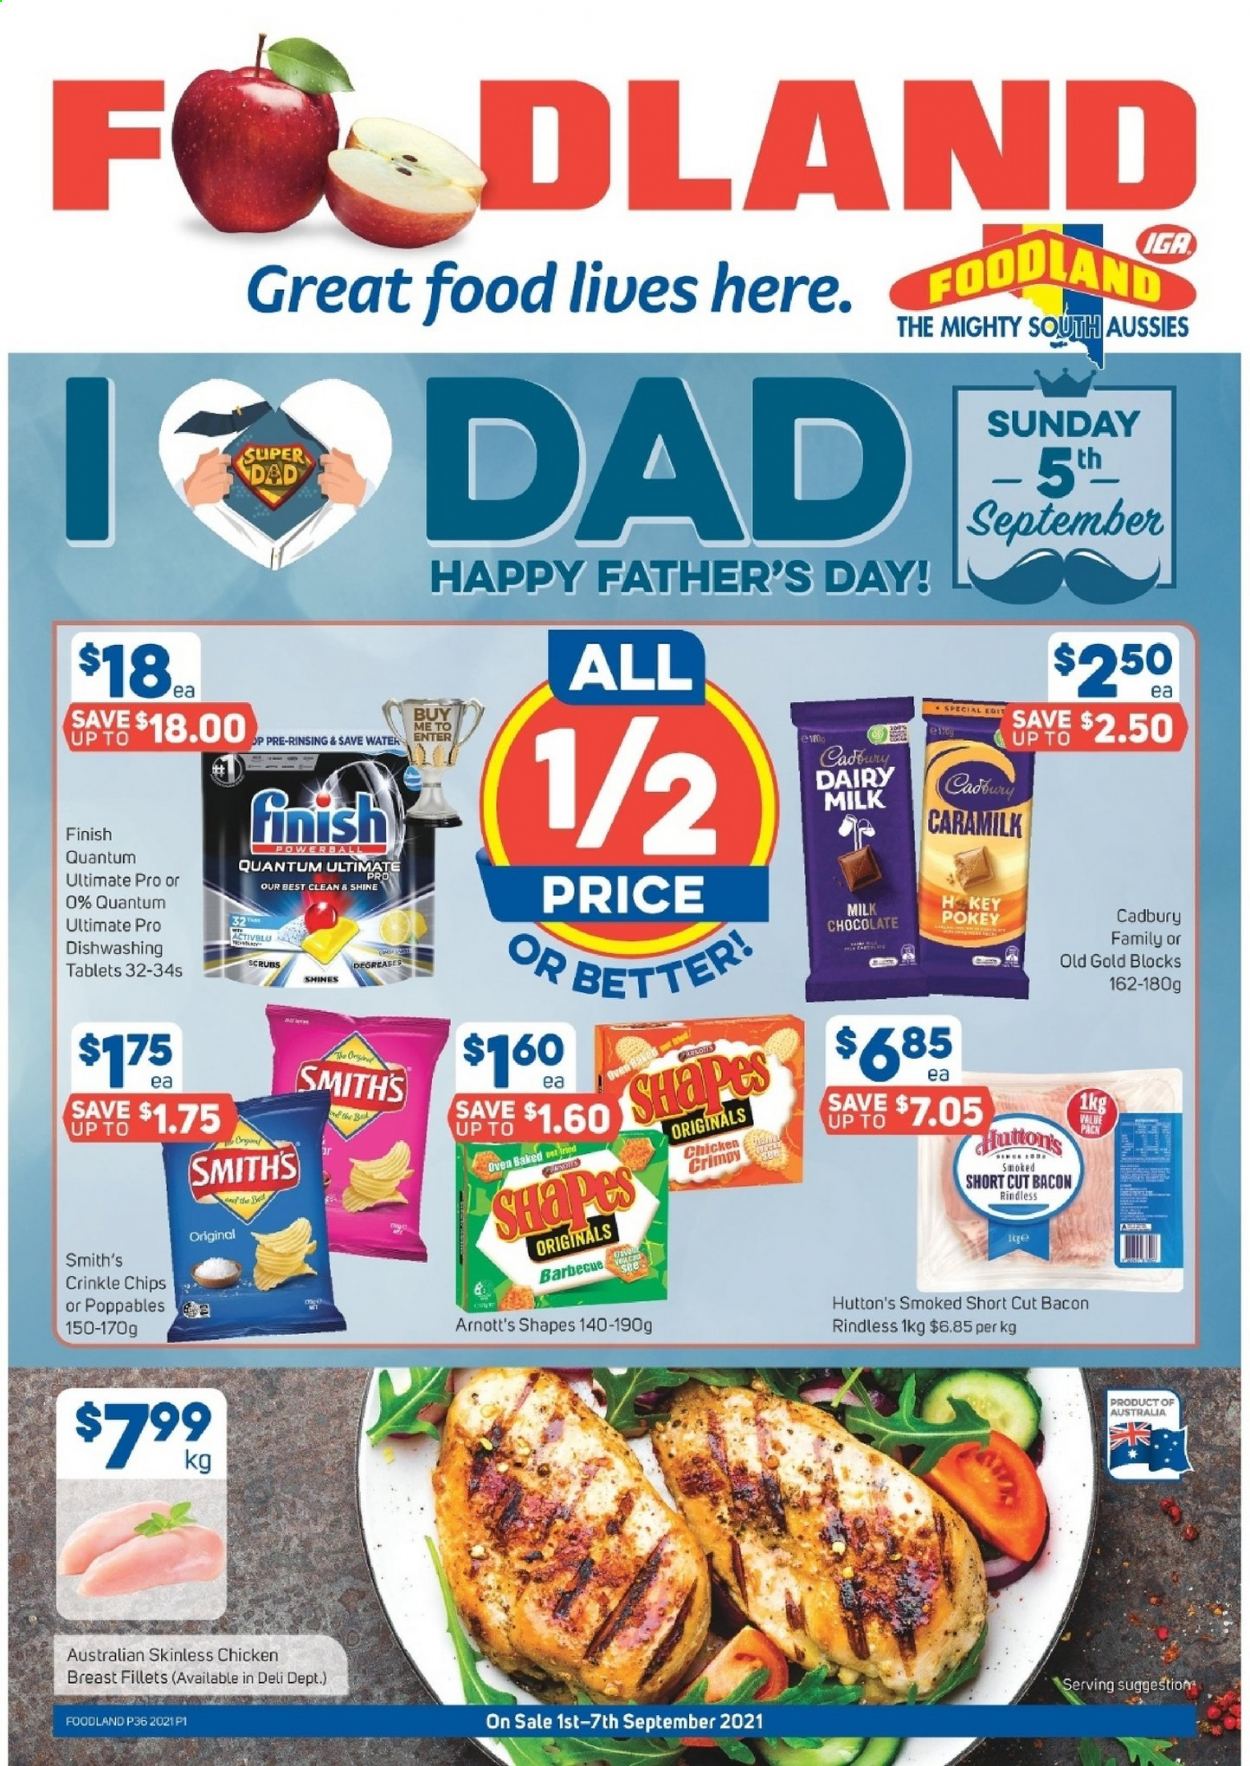 thumbnail - Foodland Catalogue - 1 Sep 2021 - 7 Sep 2021 - Sales products - bacon, crinkle fries, milk chocolate, chocolate, Cadbury, Dairy Milk, chips, Smith's, chicken breasts, Finish Powerball. Page 1.